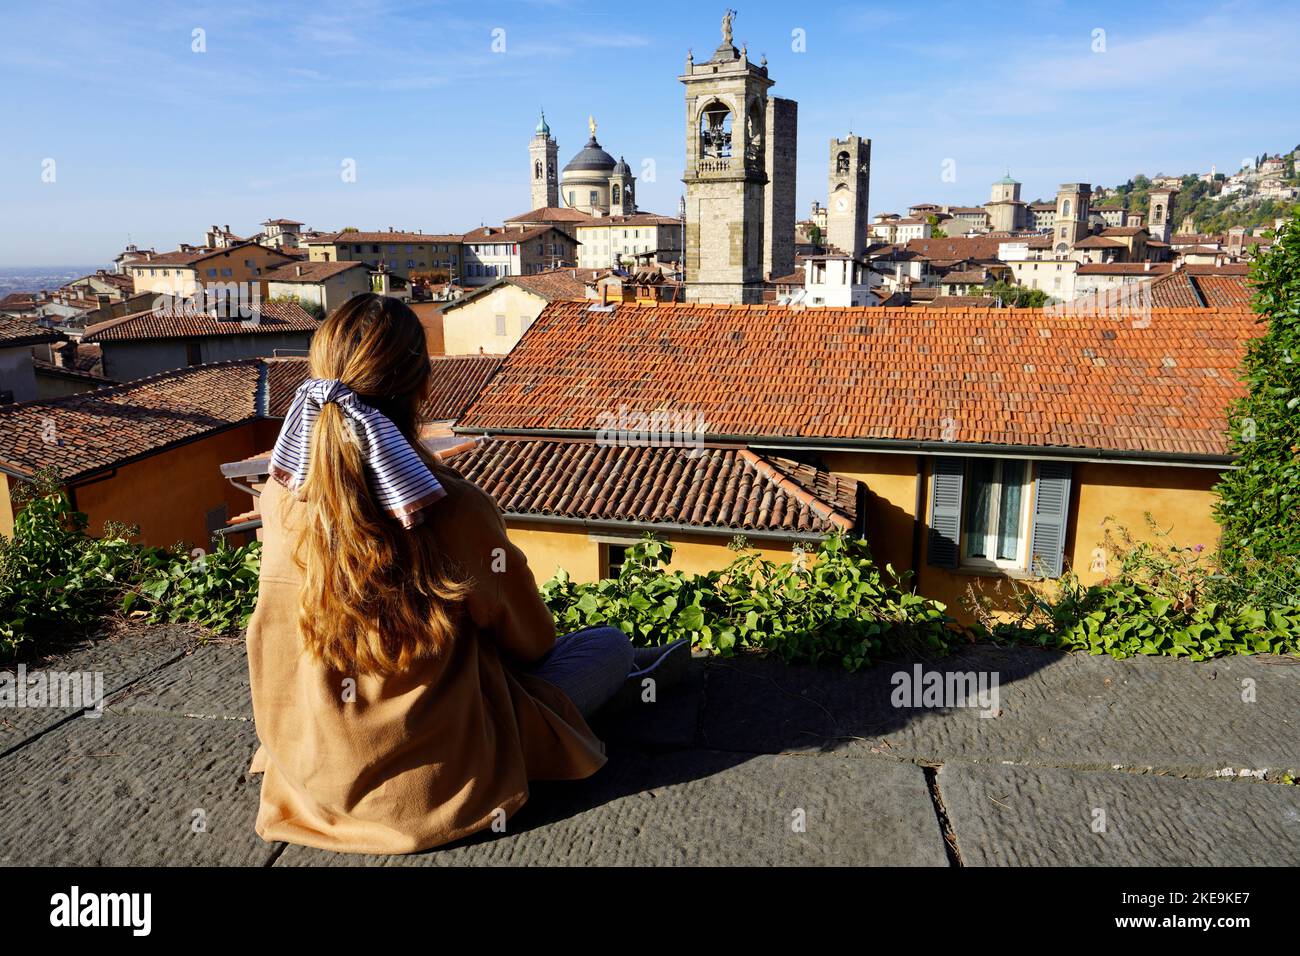 Tourism in Bergamo, Italy. Back view of girl sitting on wall in upper city enjoying cityscape of Bergamo, Lombardy, Italy. Stock Photo